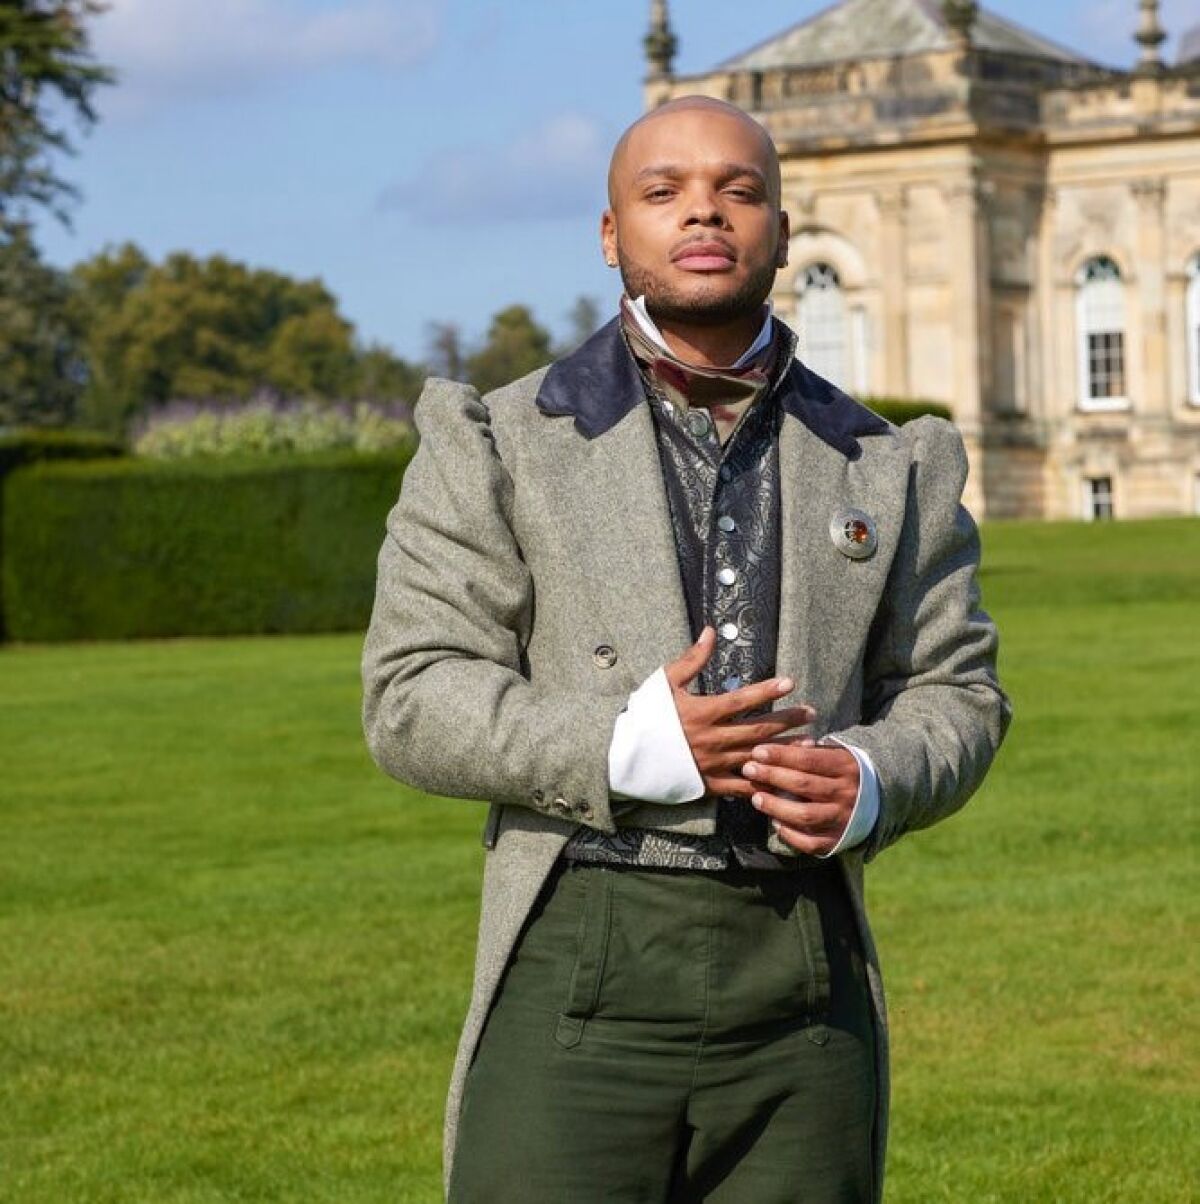 Alex "Achilles" King goes back in time to a British castle to woo a fair maiden in NBC's new dating series, "The Courtship."